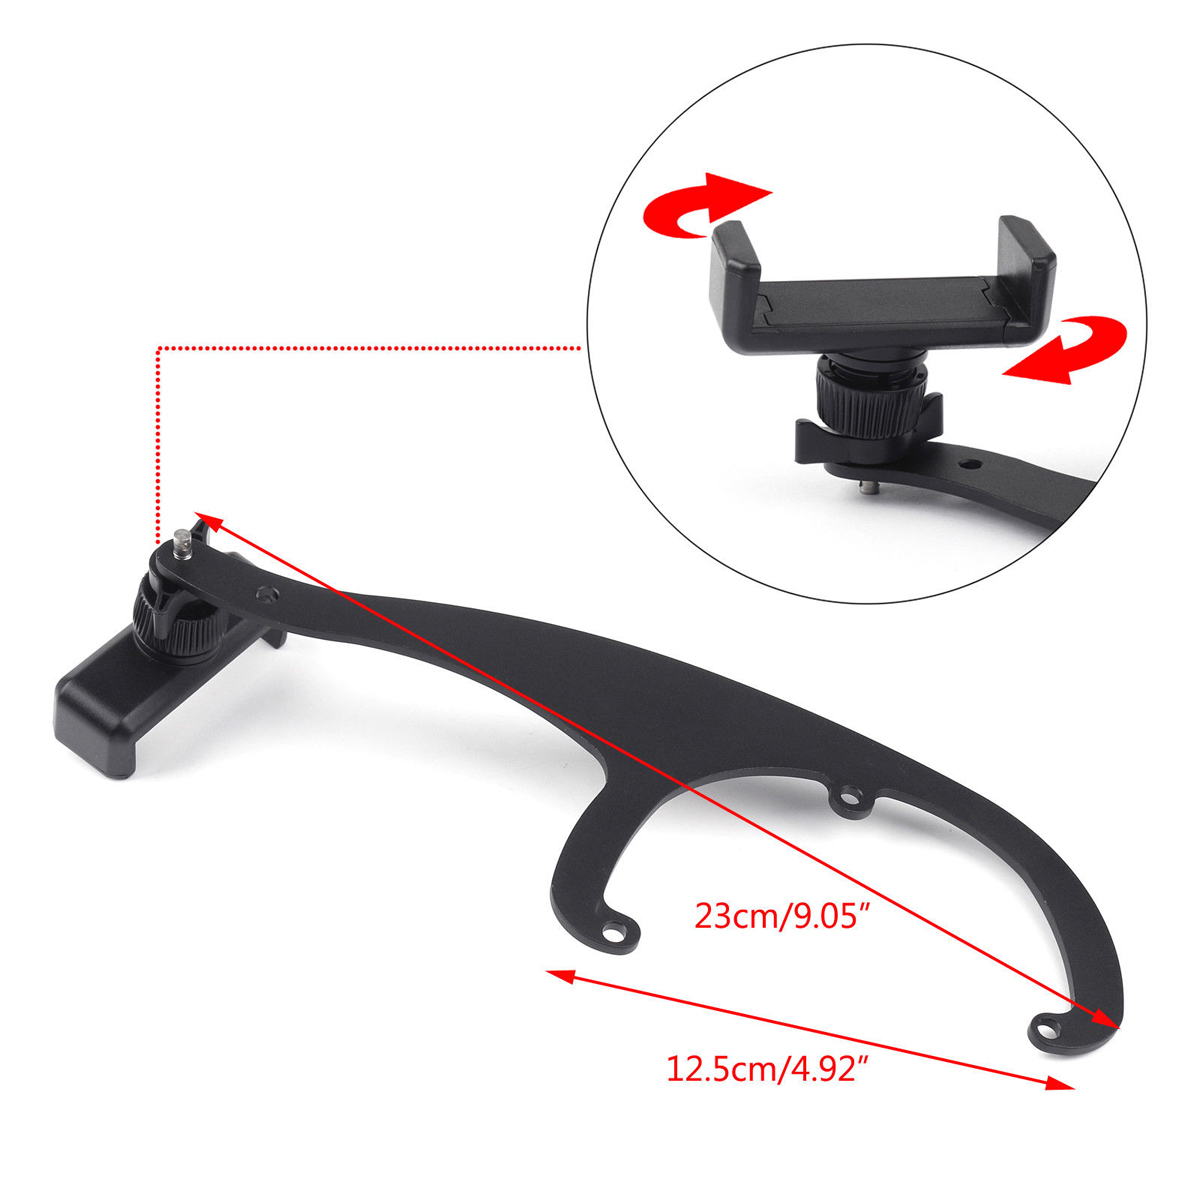 Bakeey-360deg-Rotation-Car-Phone-Mount-Cradle-Holder-Stand-for-Mini-Cooper-R60R61-R55R56-F60-1637156-5